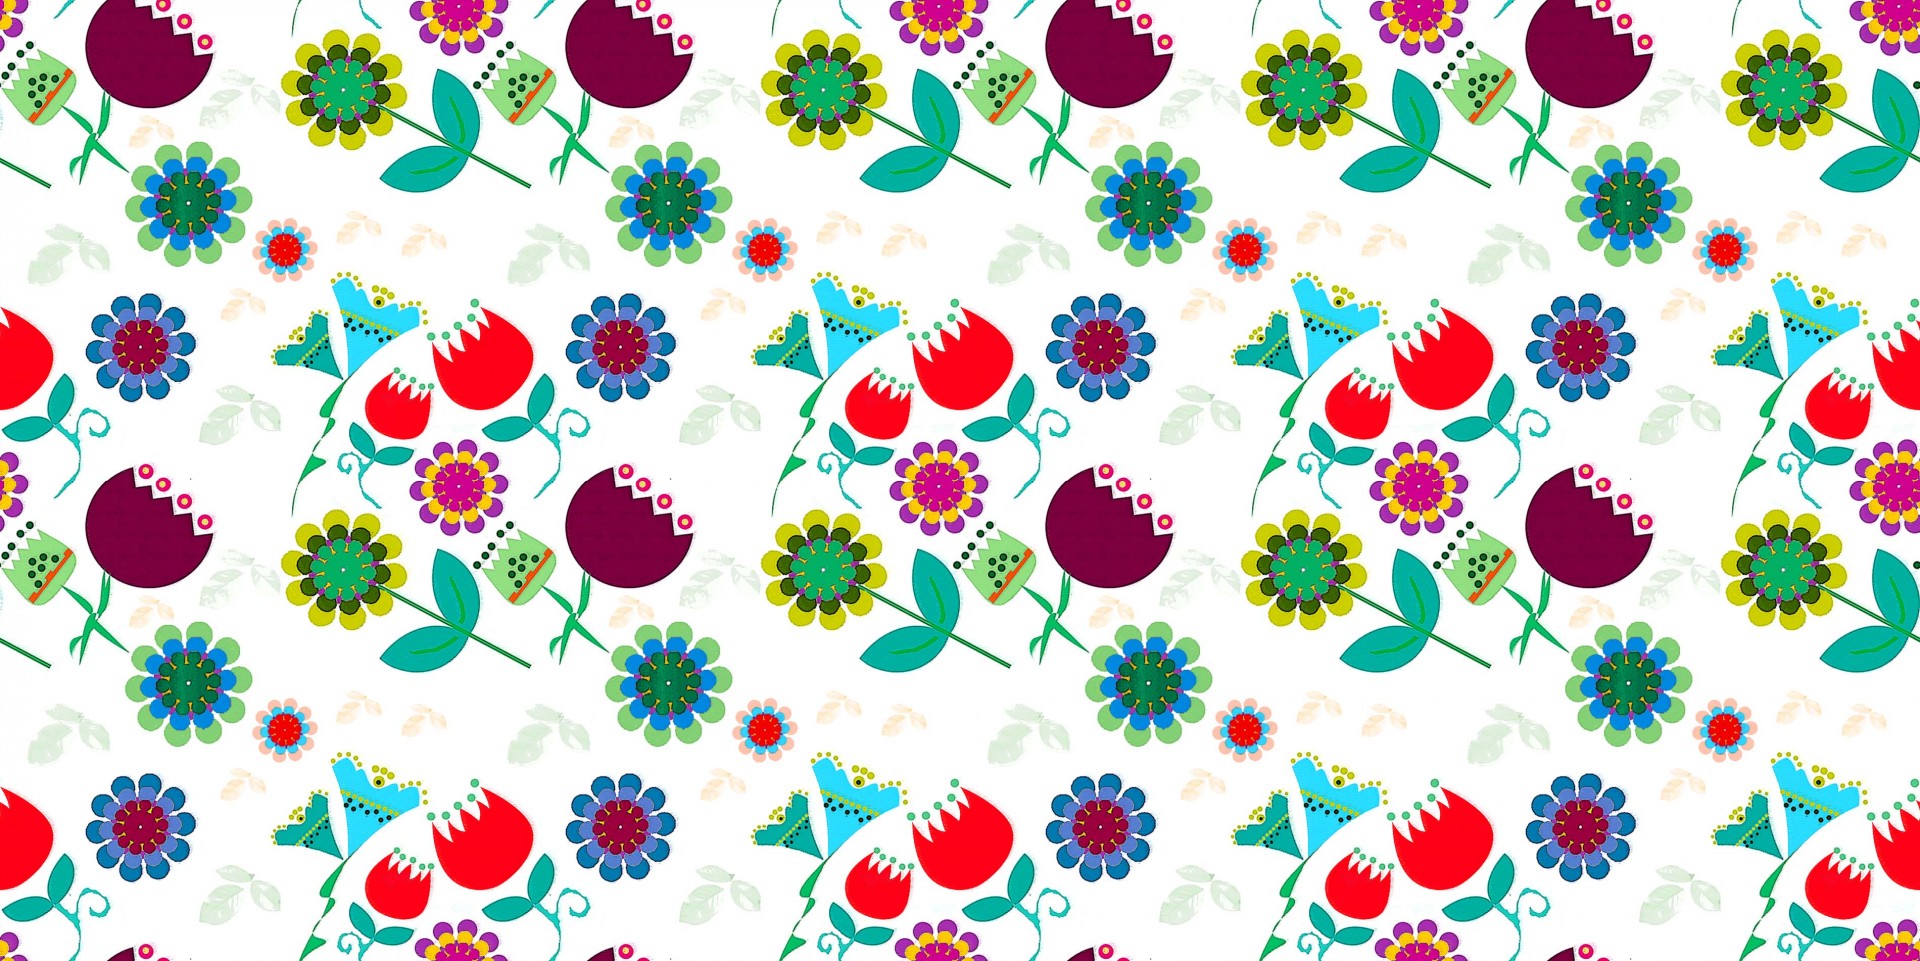 colorful pattern wallpaper flowers free photo